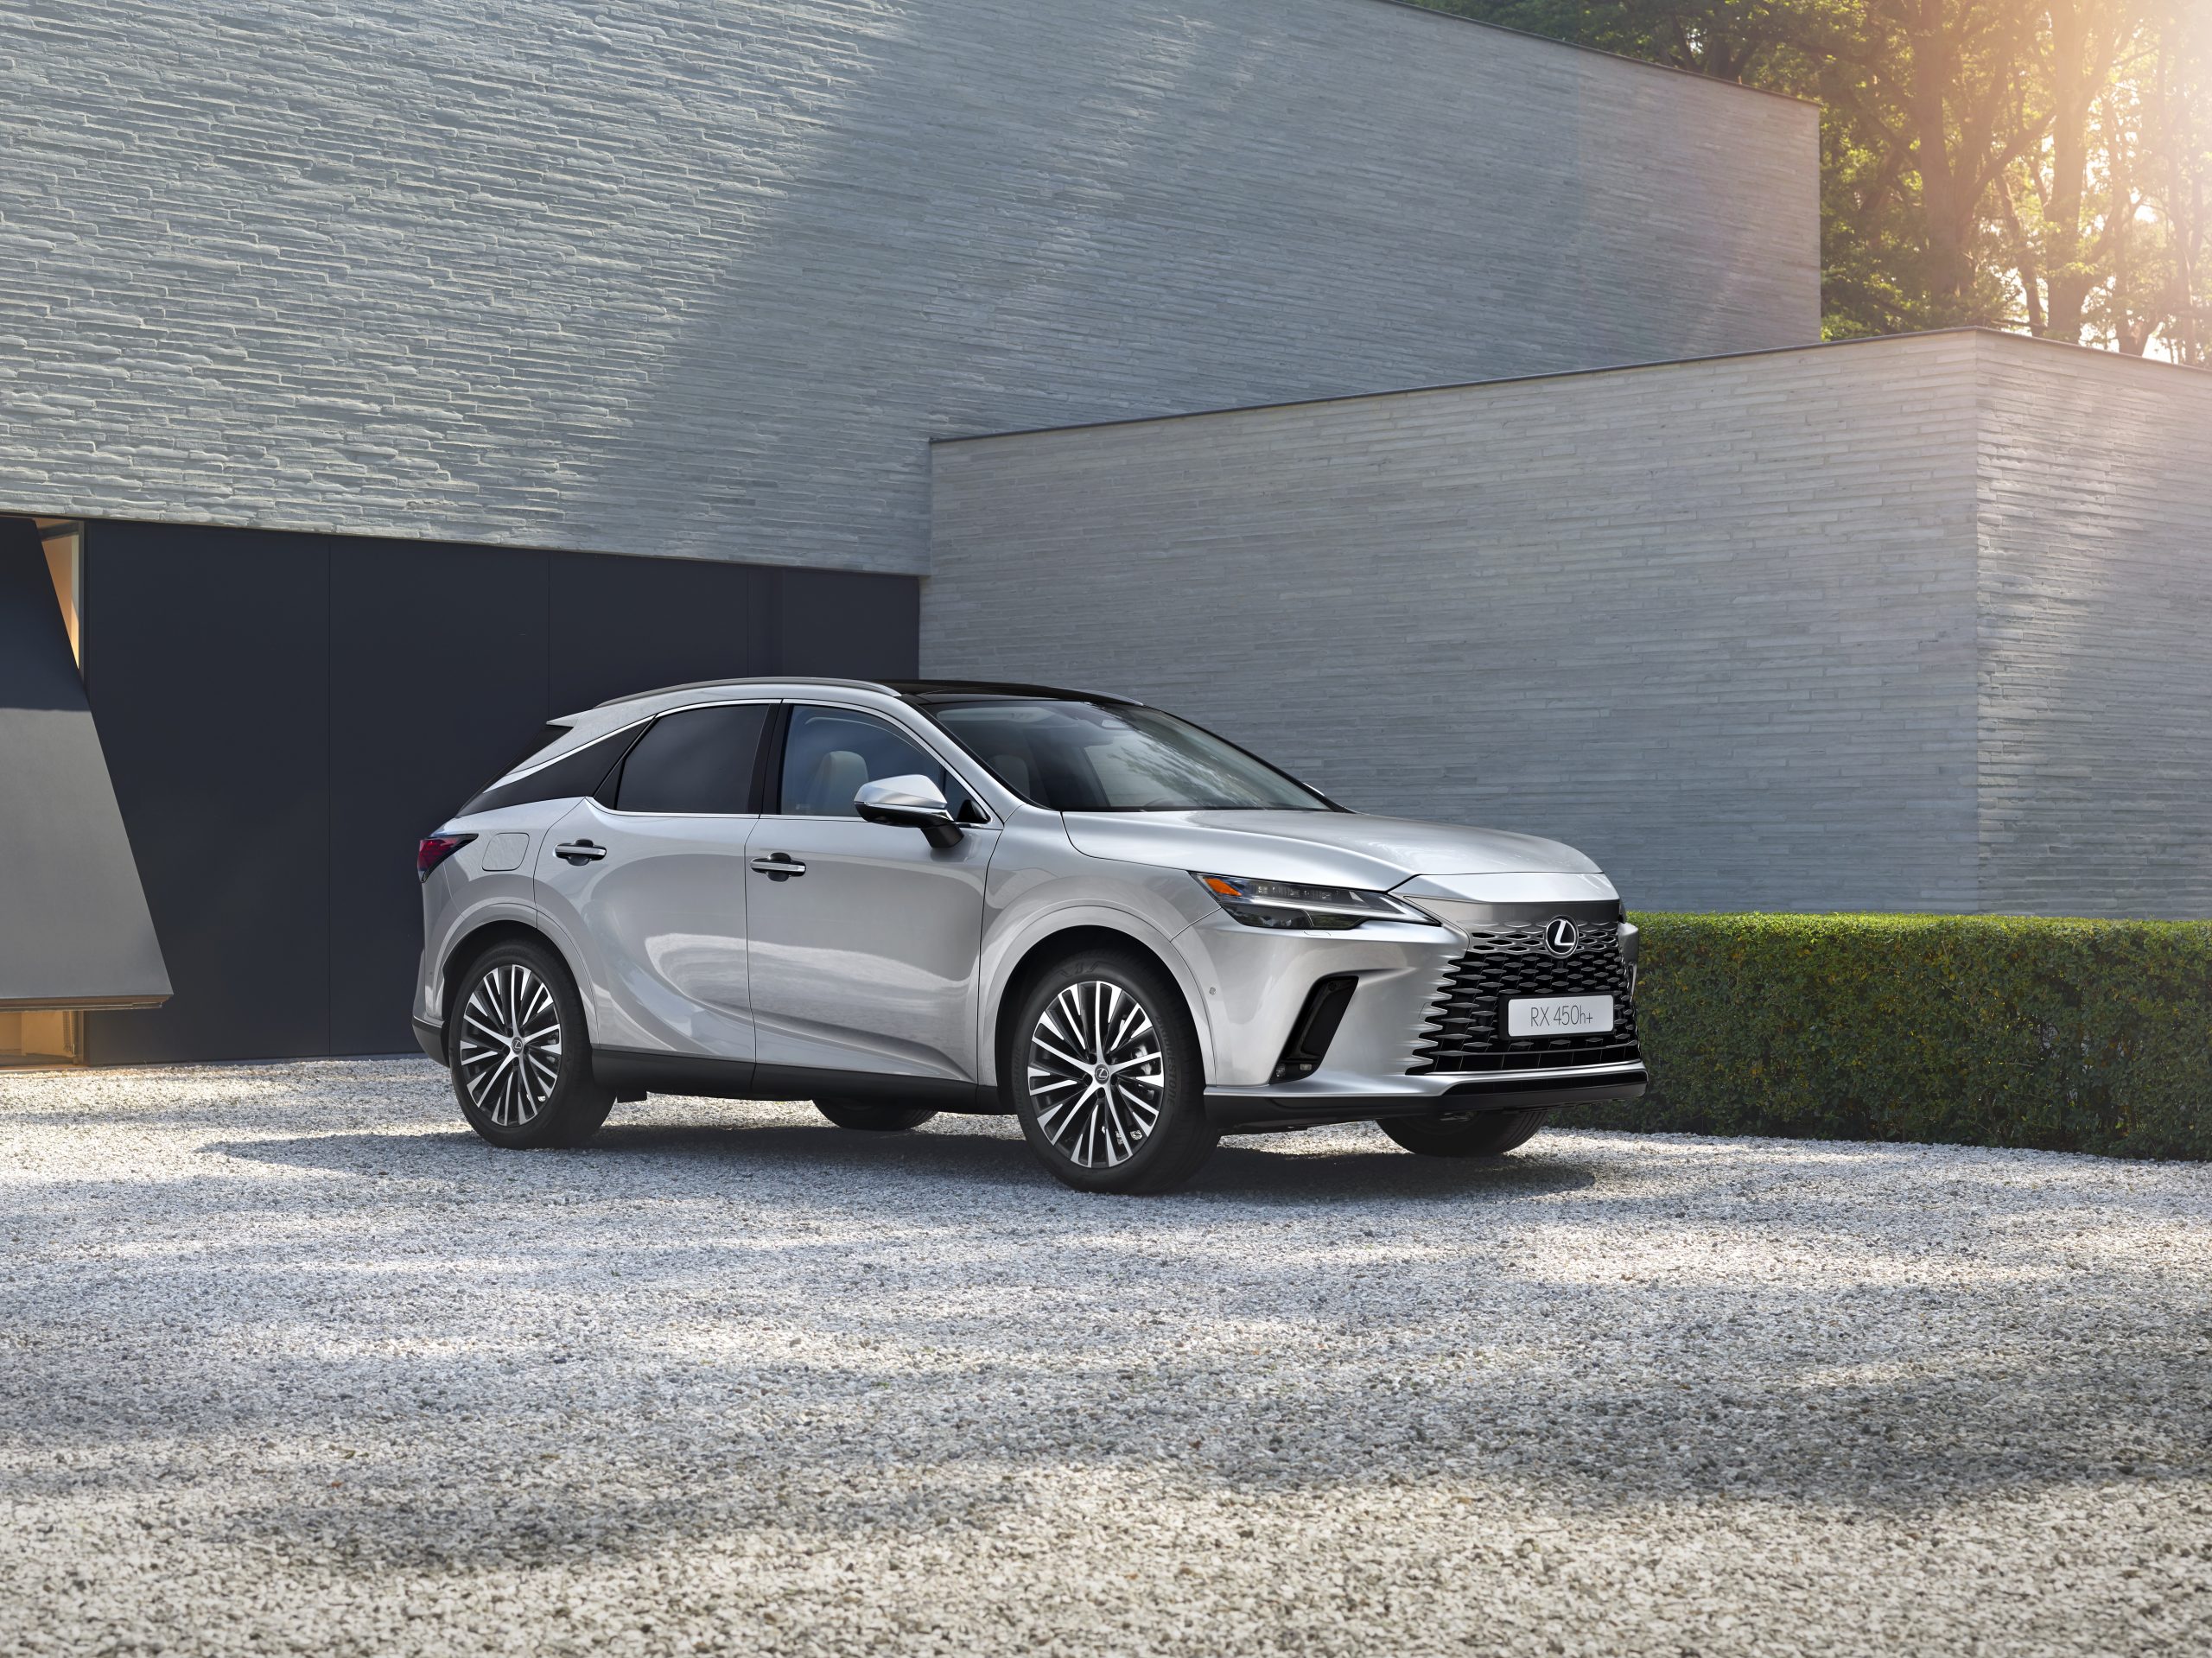 World Premiere Of The All-new Lexus RX